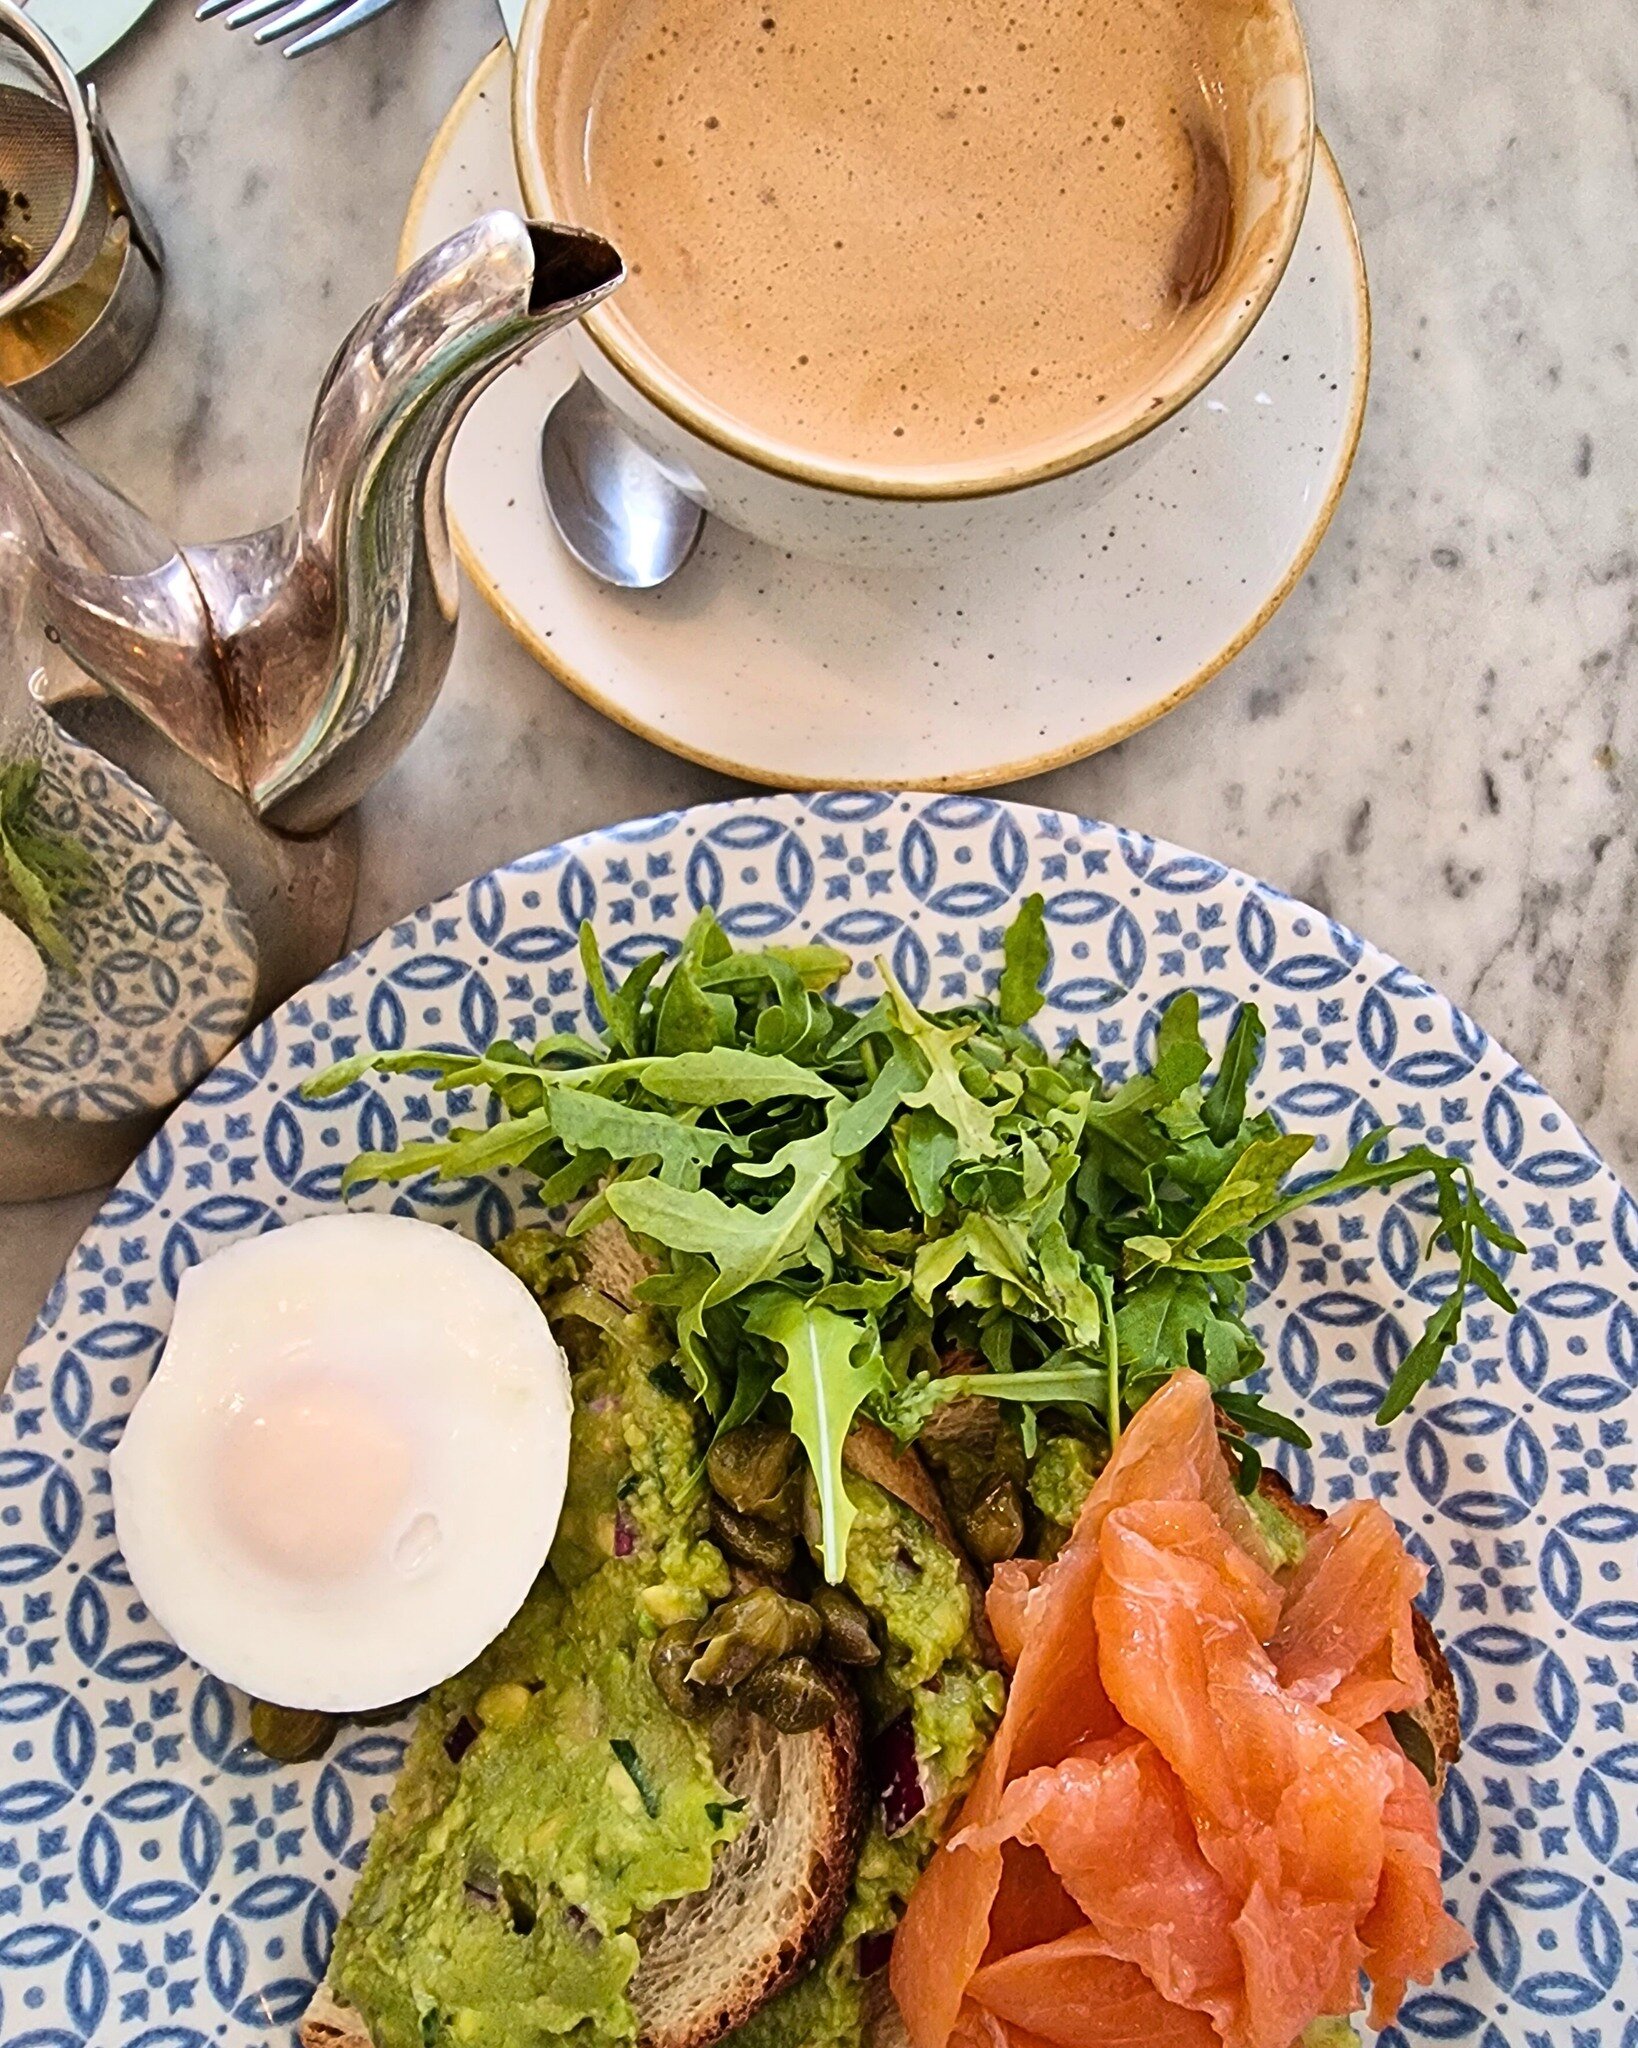 Breakfast isn't just a meal, it's an experience at STW 🤩👌

We're looking forward to serving you your favourites today...

#breakfastgoals #breakfasttime #midweekmotivation #midweek #breakfastclub #brunching #smokedsalmon #coffeetime #cappuccino #le